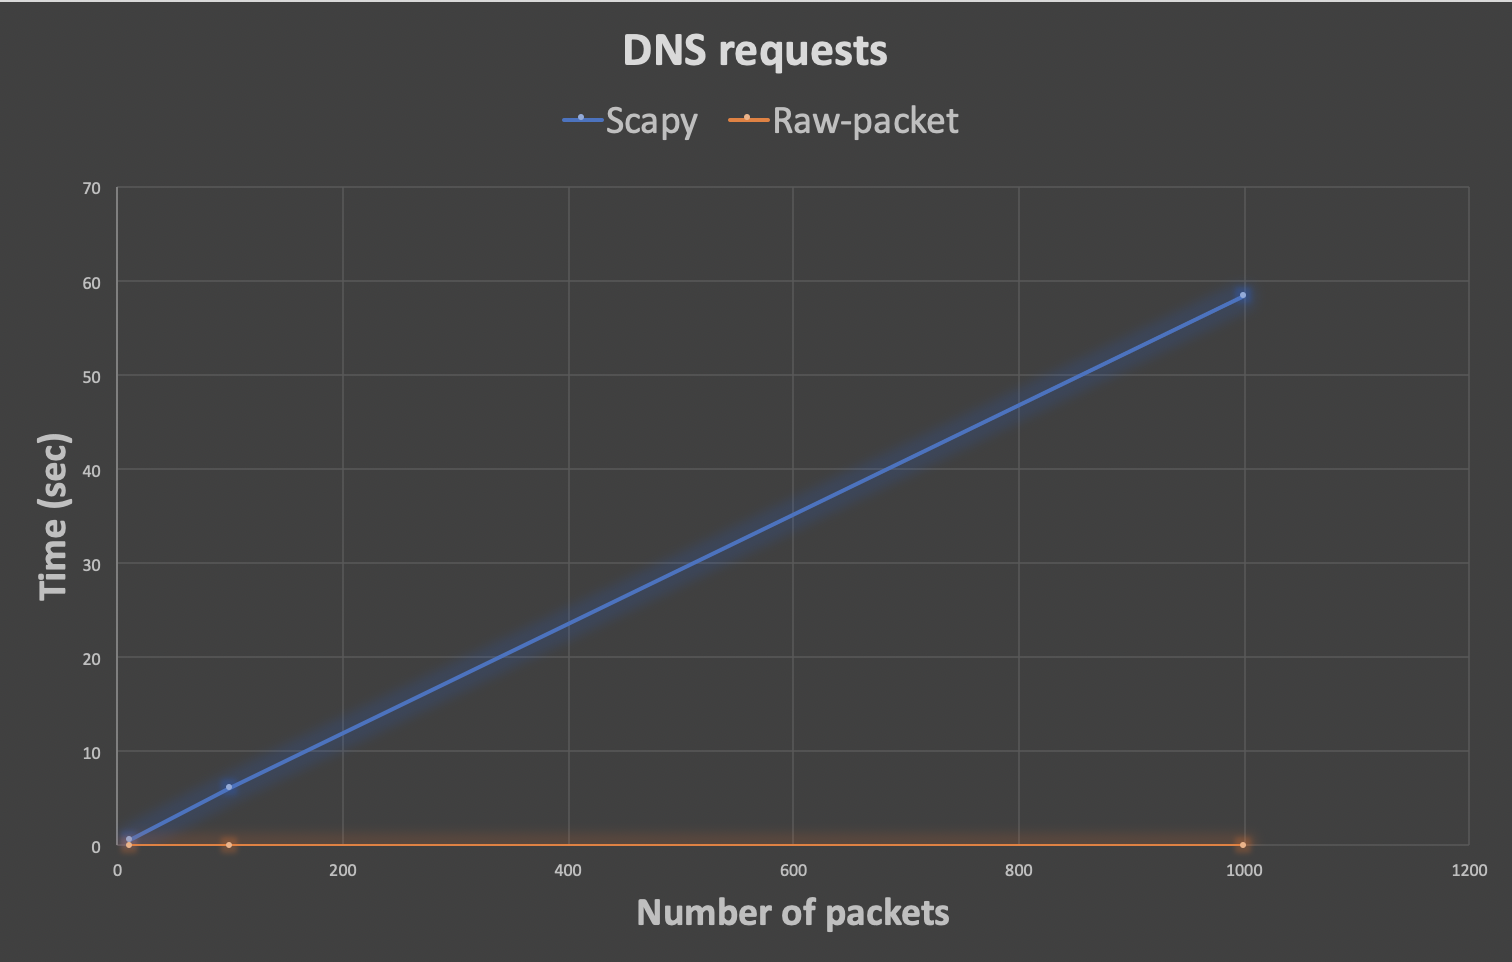 Scapy vs. Raw-packet DNS requests